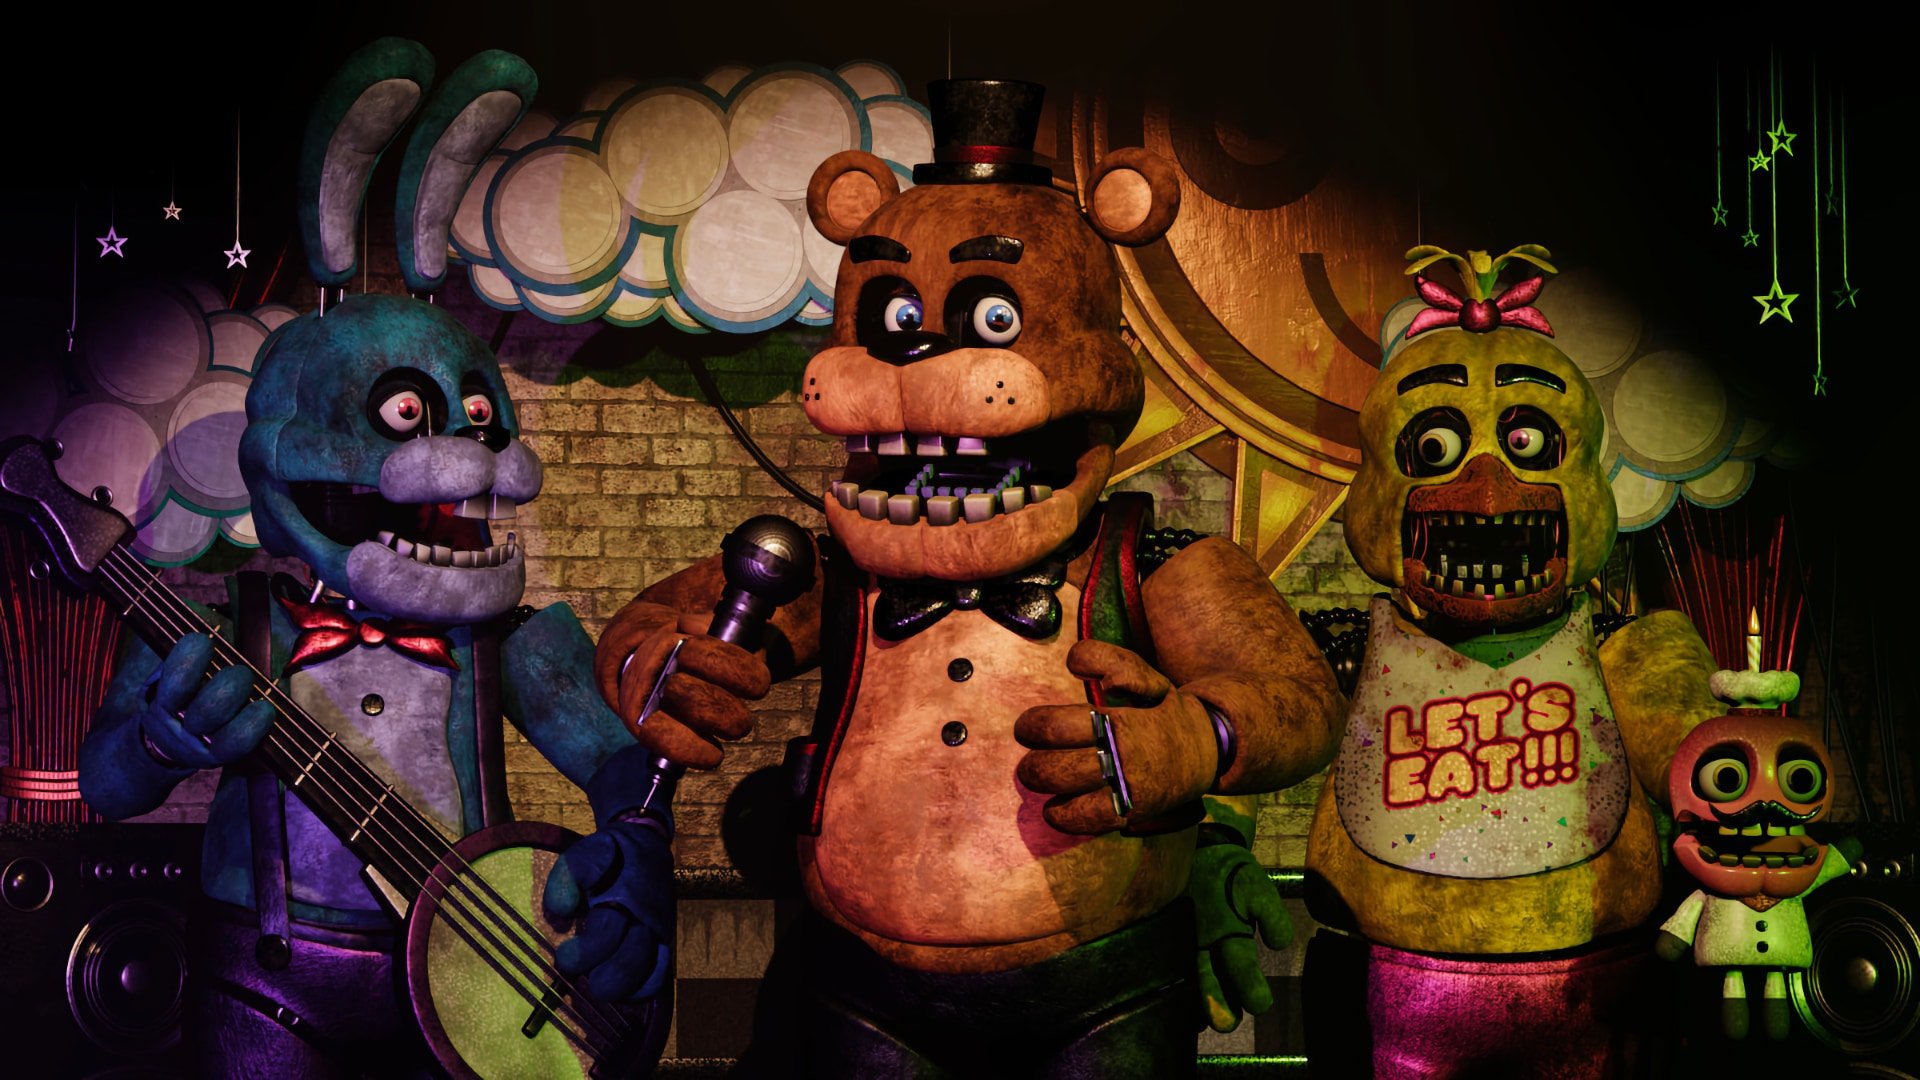 Steam Community :: Guide :: All Characters and their Moves in FNAF